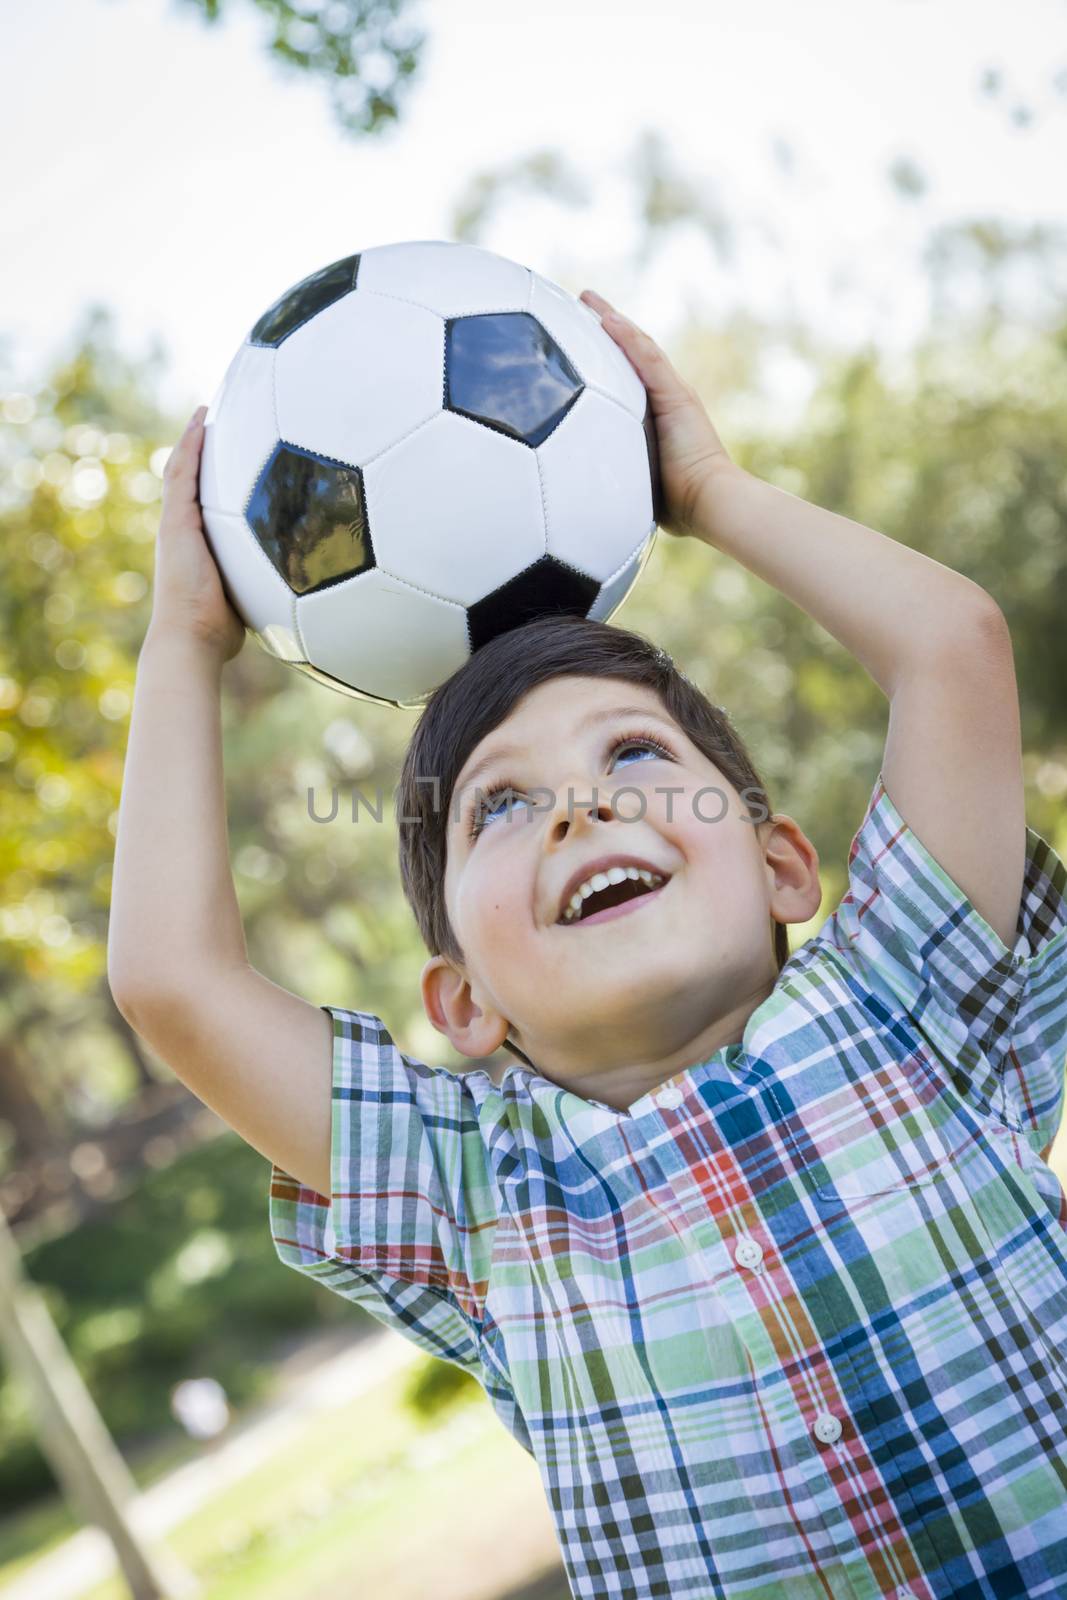 Cute Young Boy Playing with Soccer Ball Outdoors in the Park.